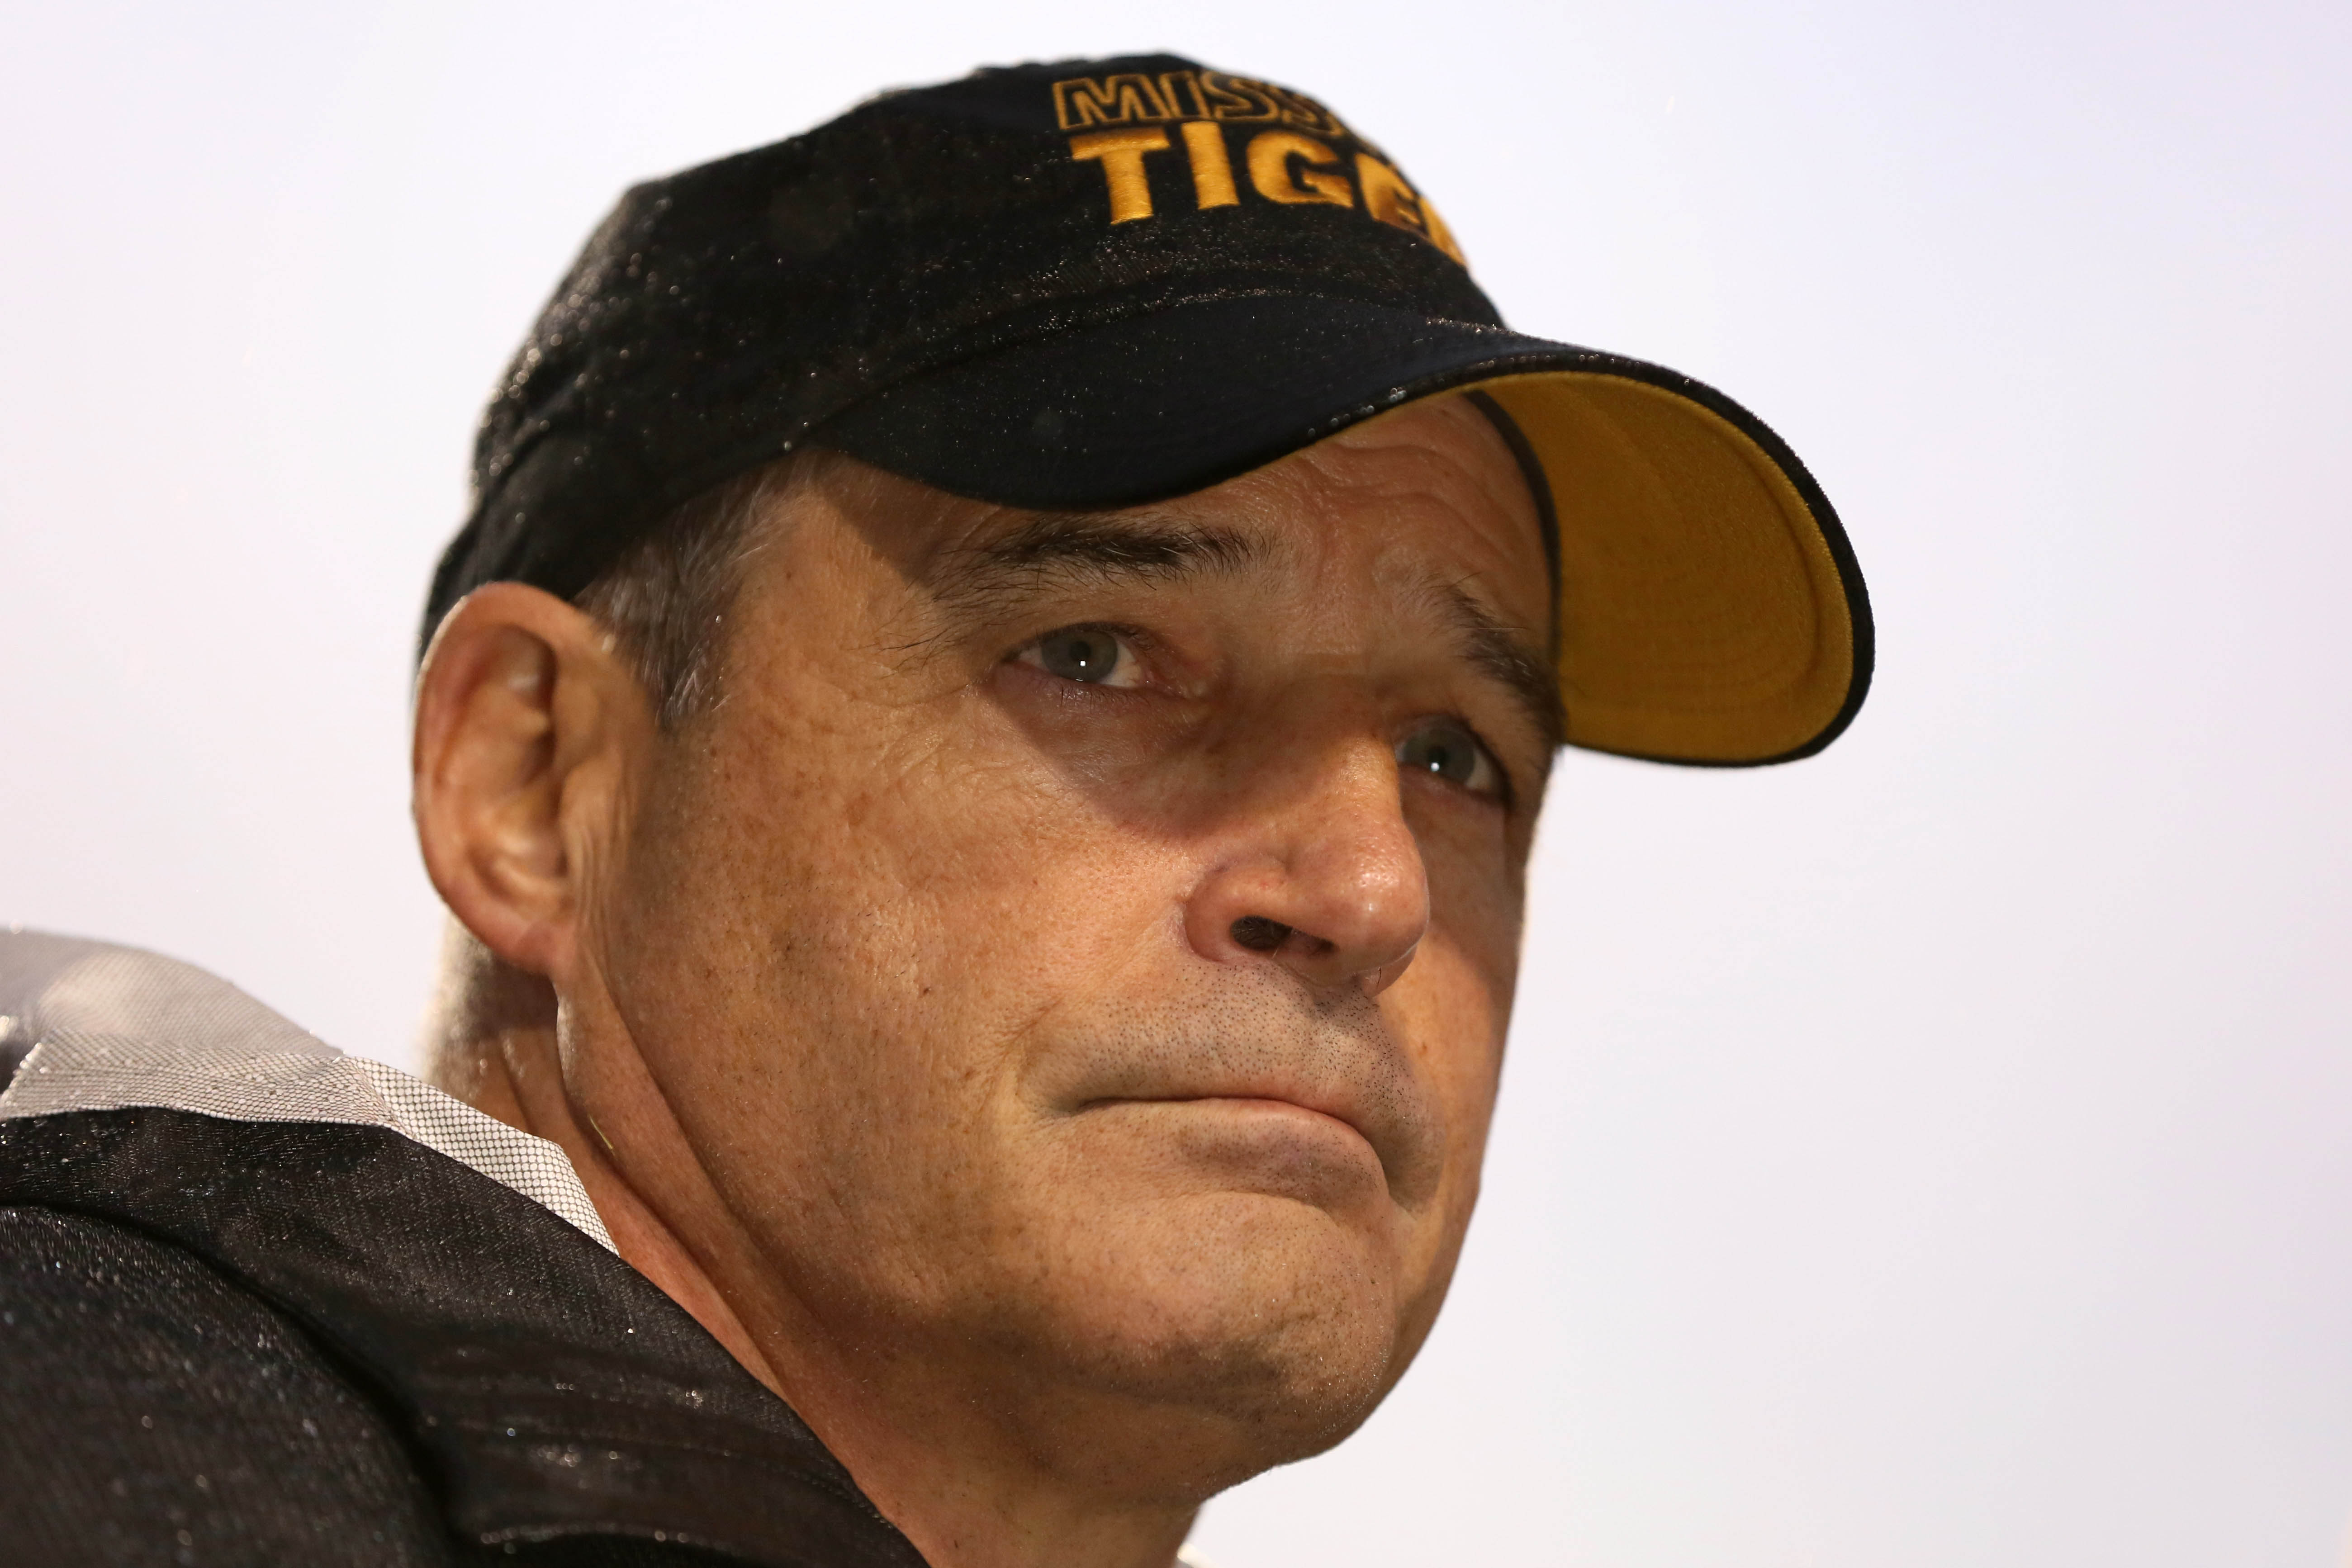 Mizzou leaving was all Gary Pinkel's fault. (That's our story and we're sticking to it.)